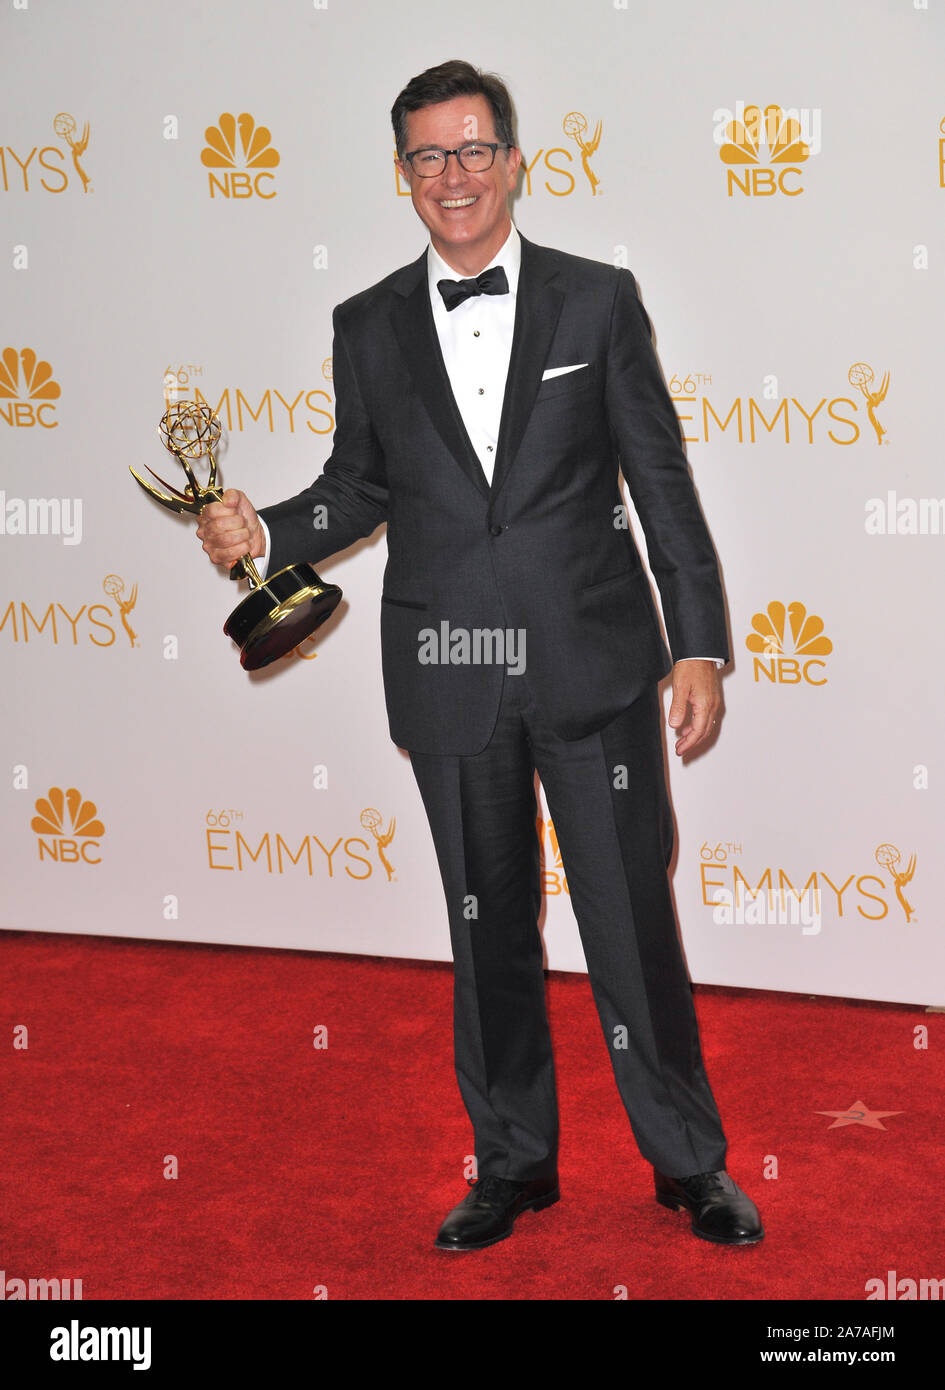 LOS ANGELES, Ca - 25. AUGUST 2014: Stephen Colbert an der 66th Primetime Emmy Awards im Nokia Theatre L.A. Live Downtown Los Angeles. © 2014 Paul Smith/Featureflash Stockfoto